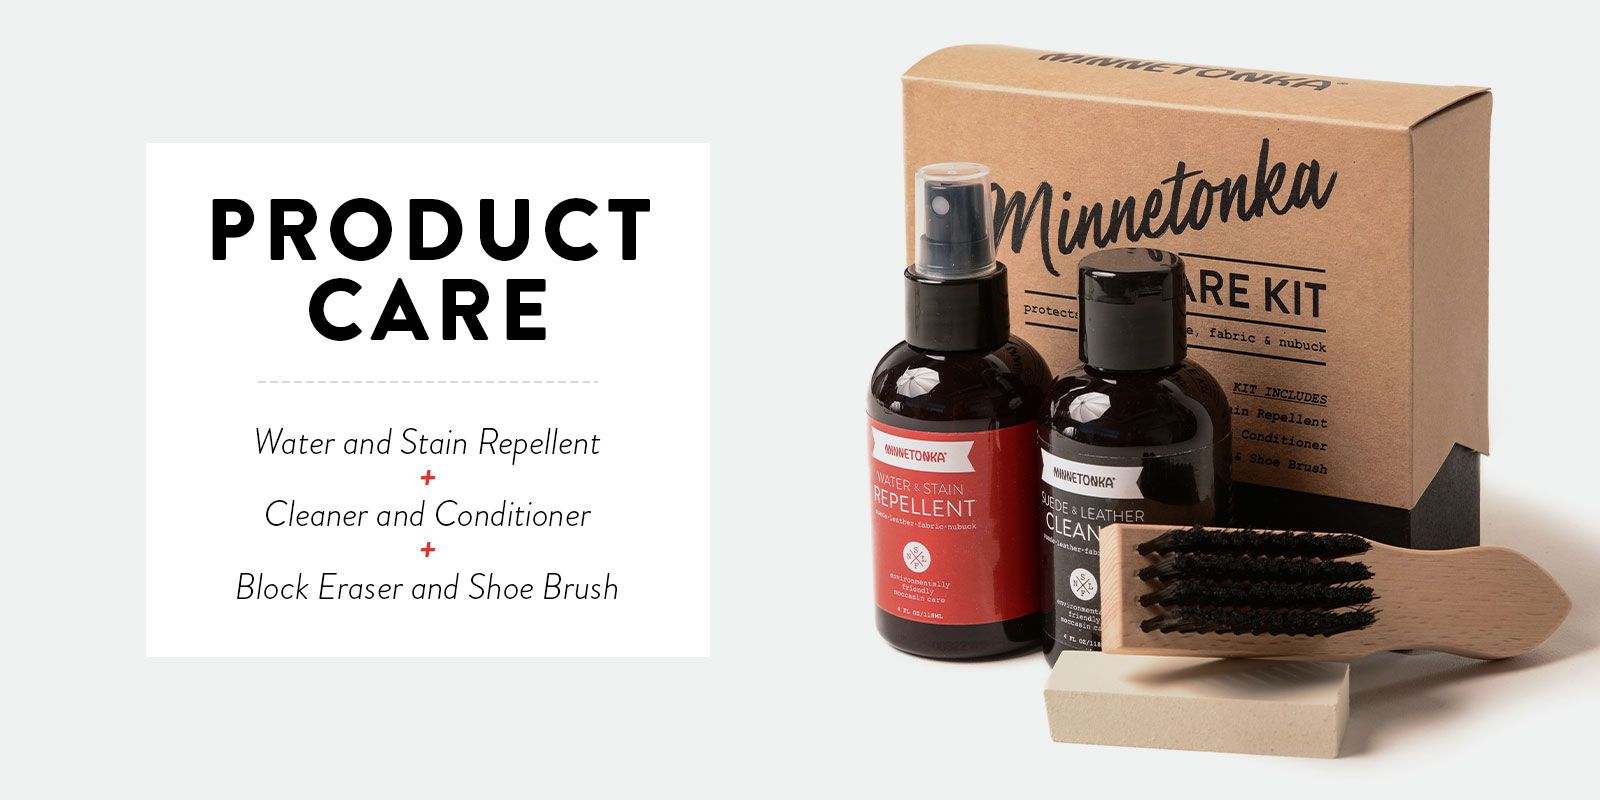 Product Care Kit includes water & stain repellent, cleaner & conditioner, block eraser & shoe brush